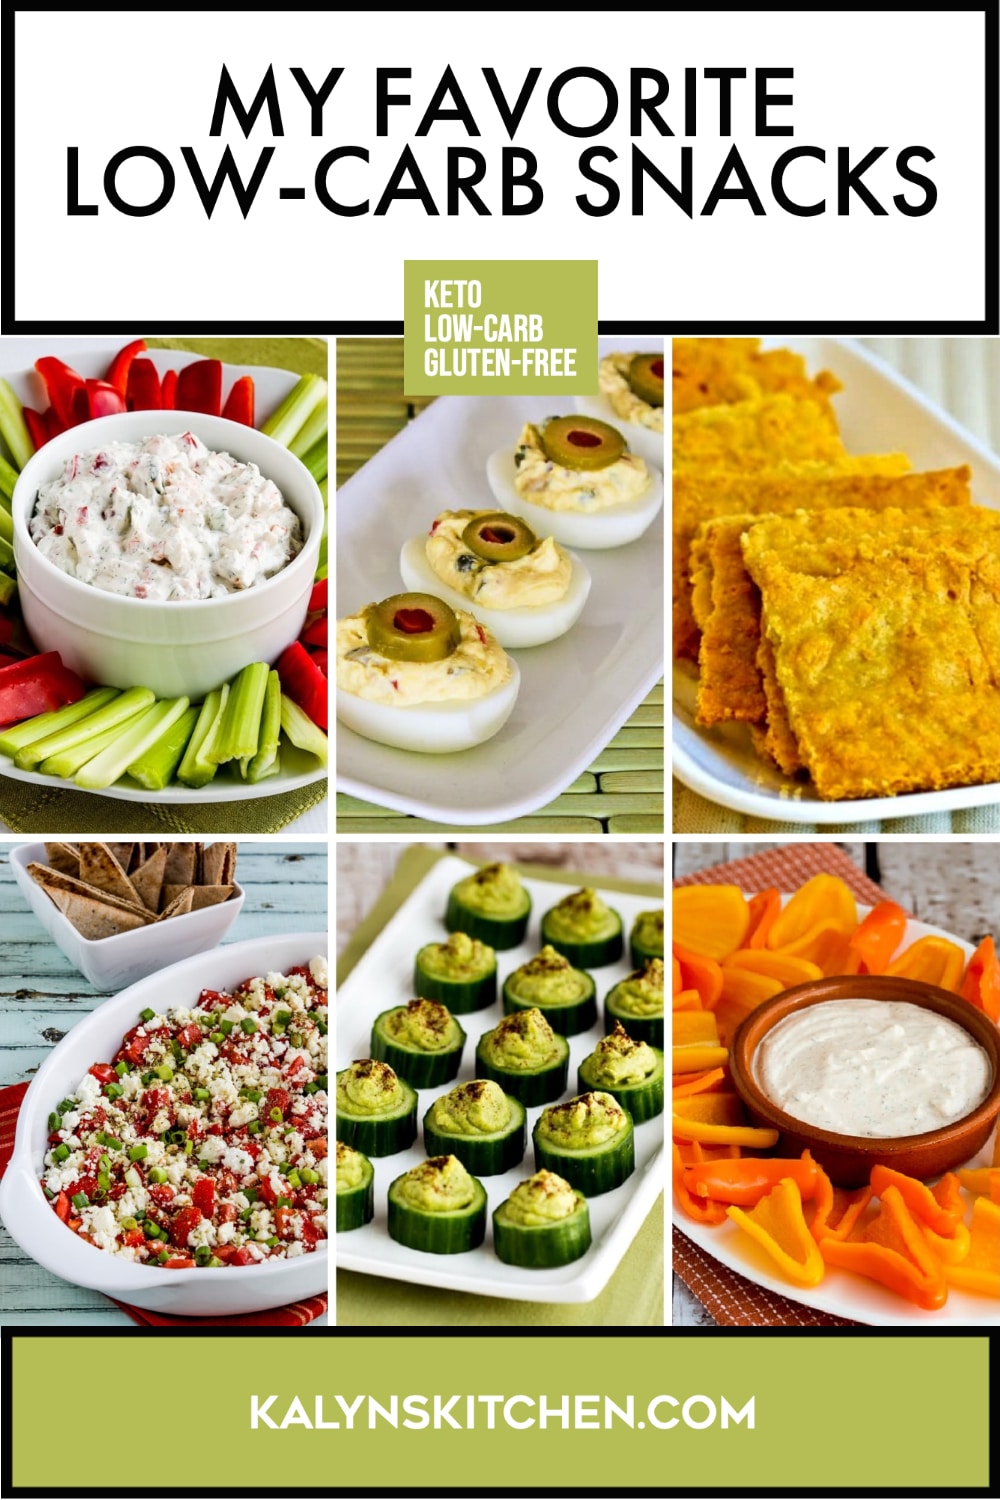 Pinterest image of My Favorite Low-Carb Snacks